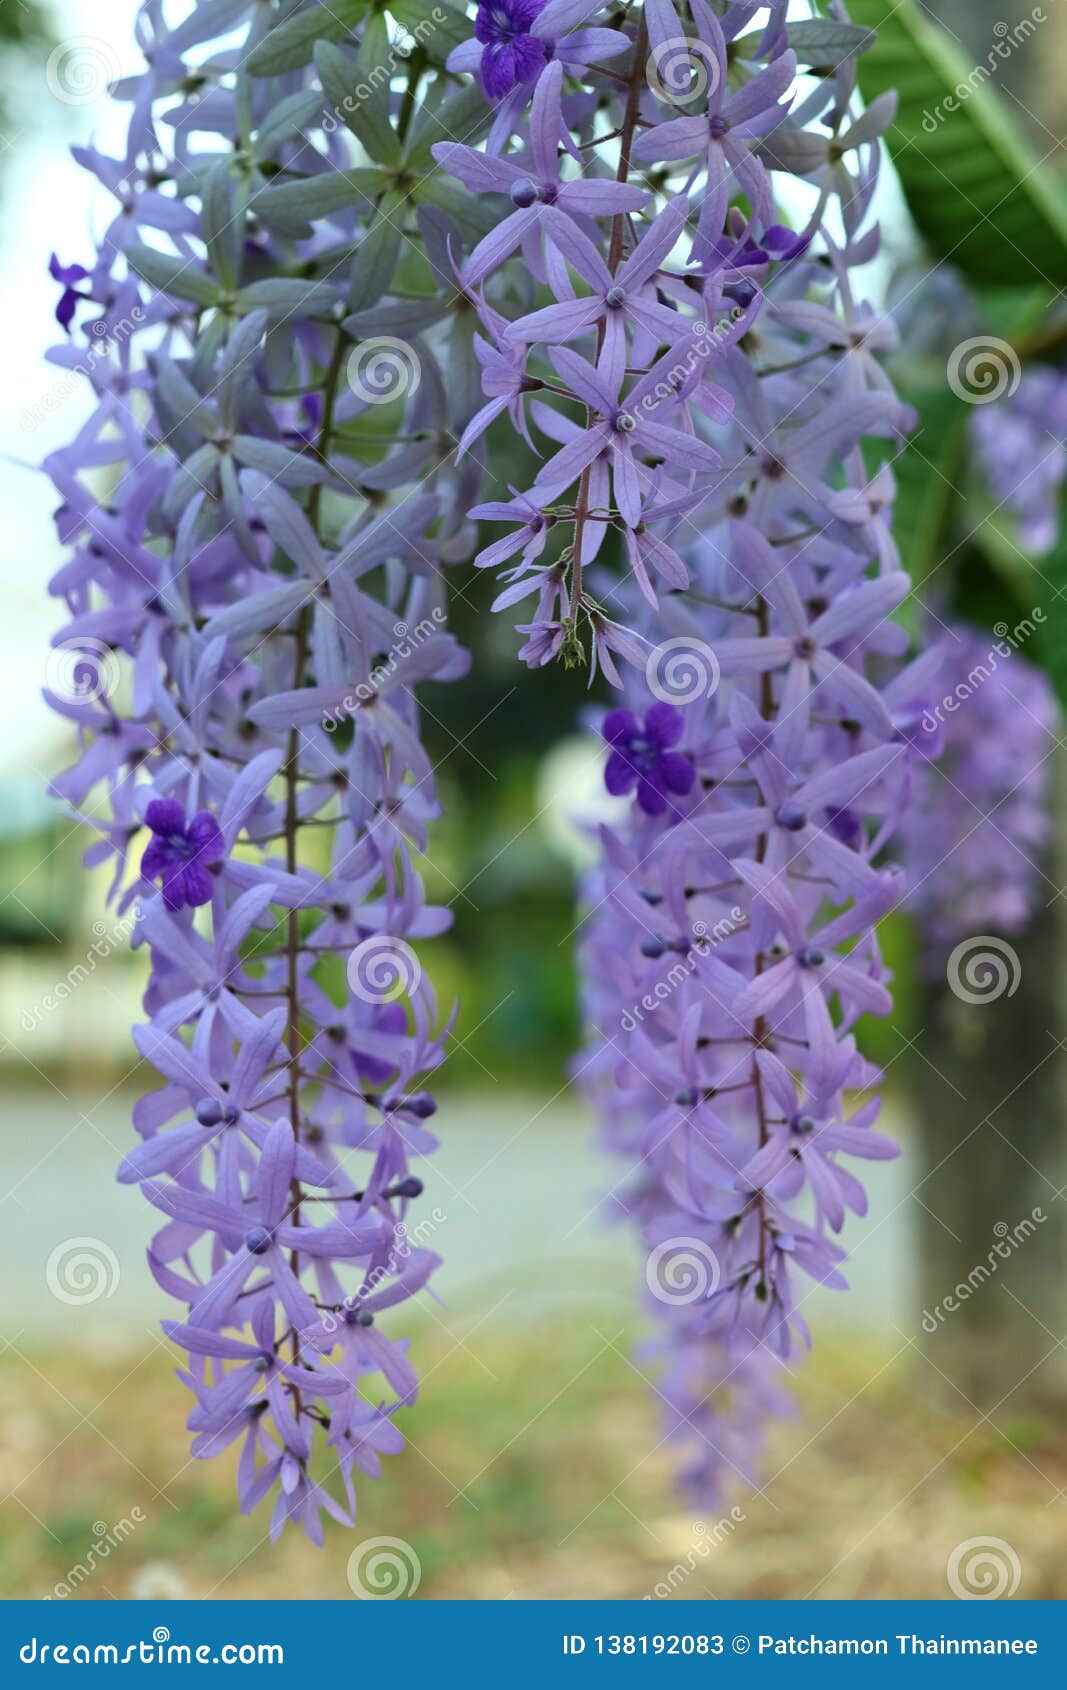 Purple Flower Bunches Tend To Bloom And Bloom At The Same